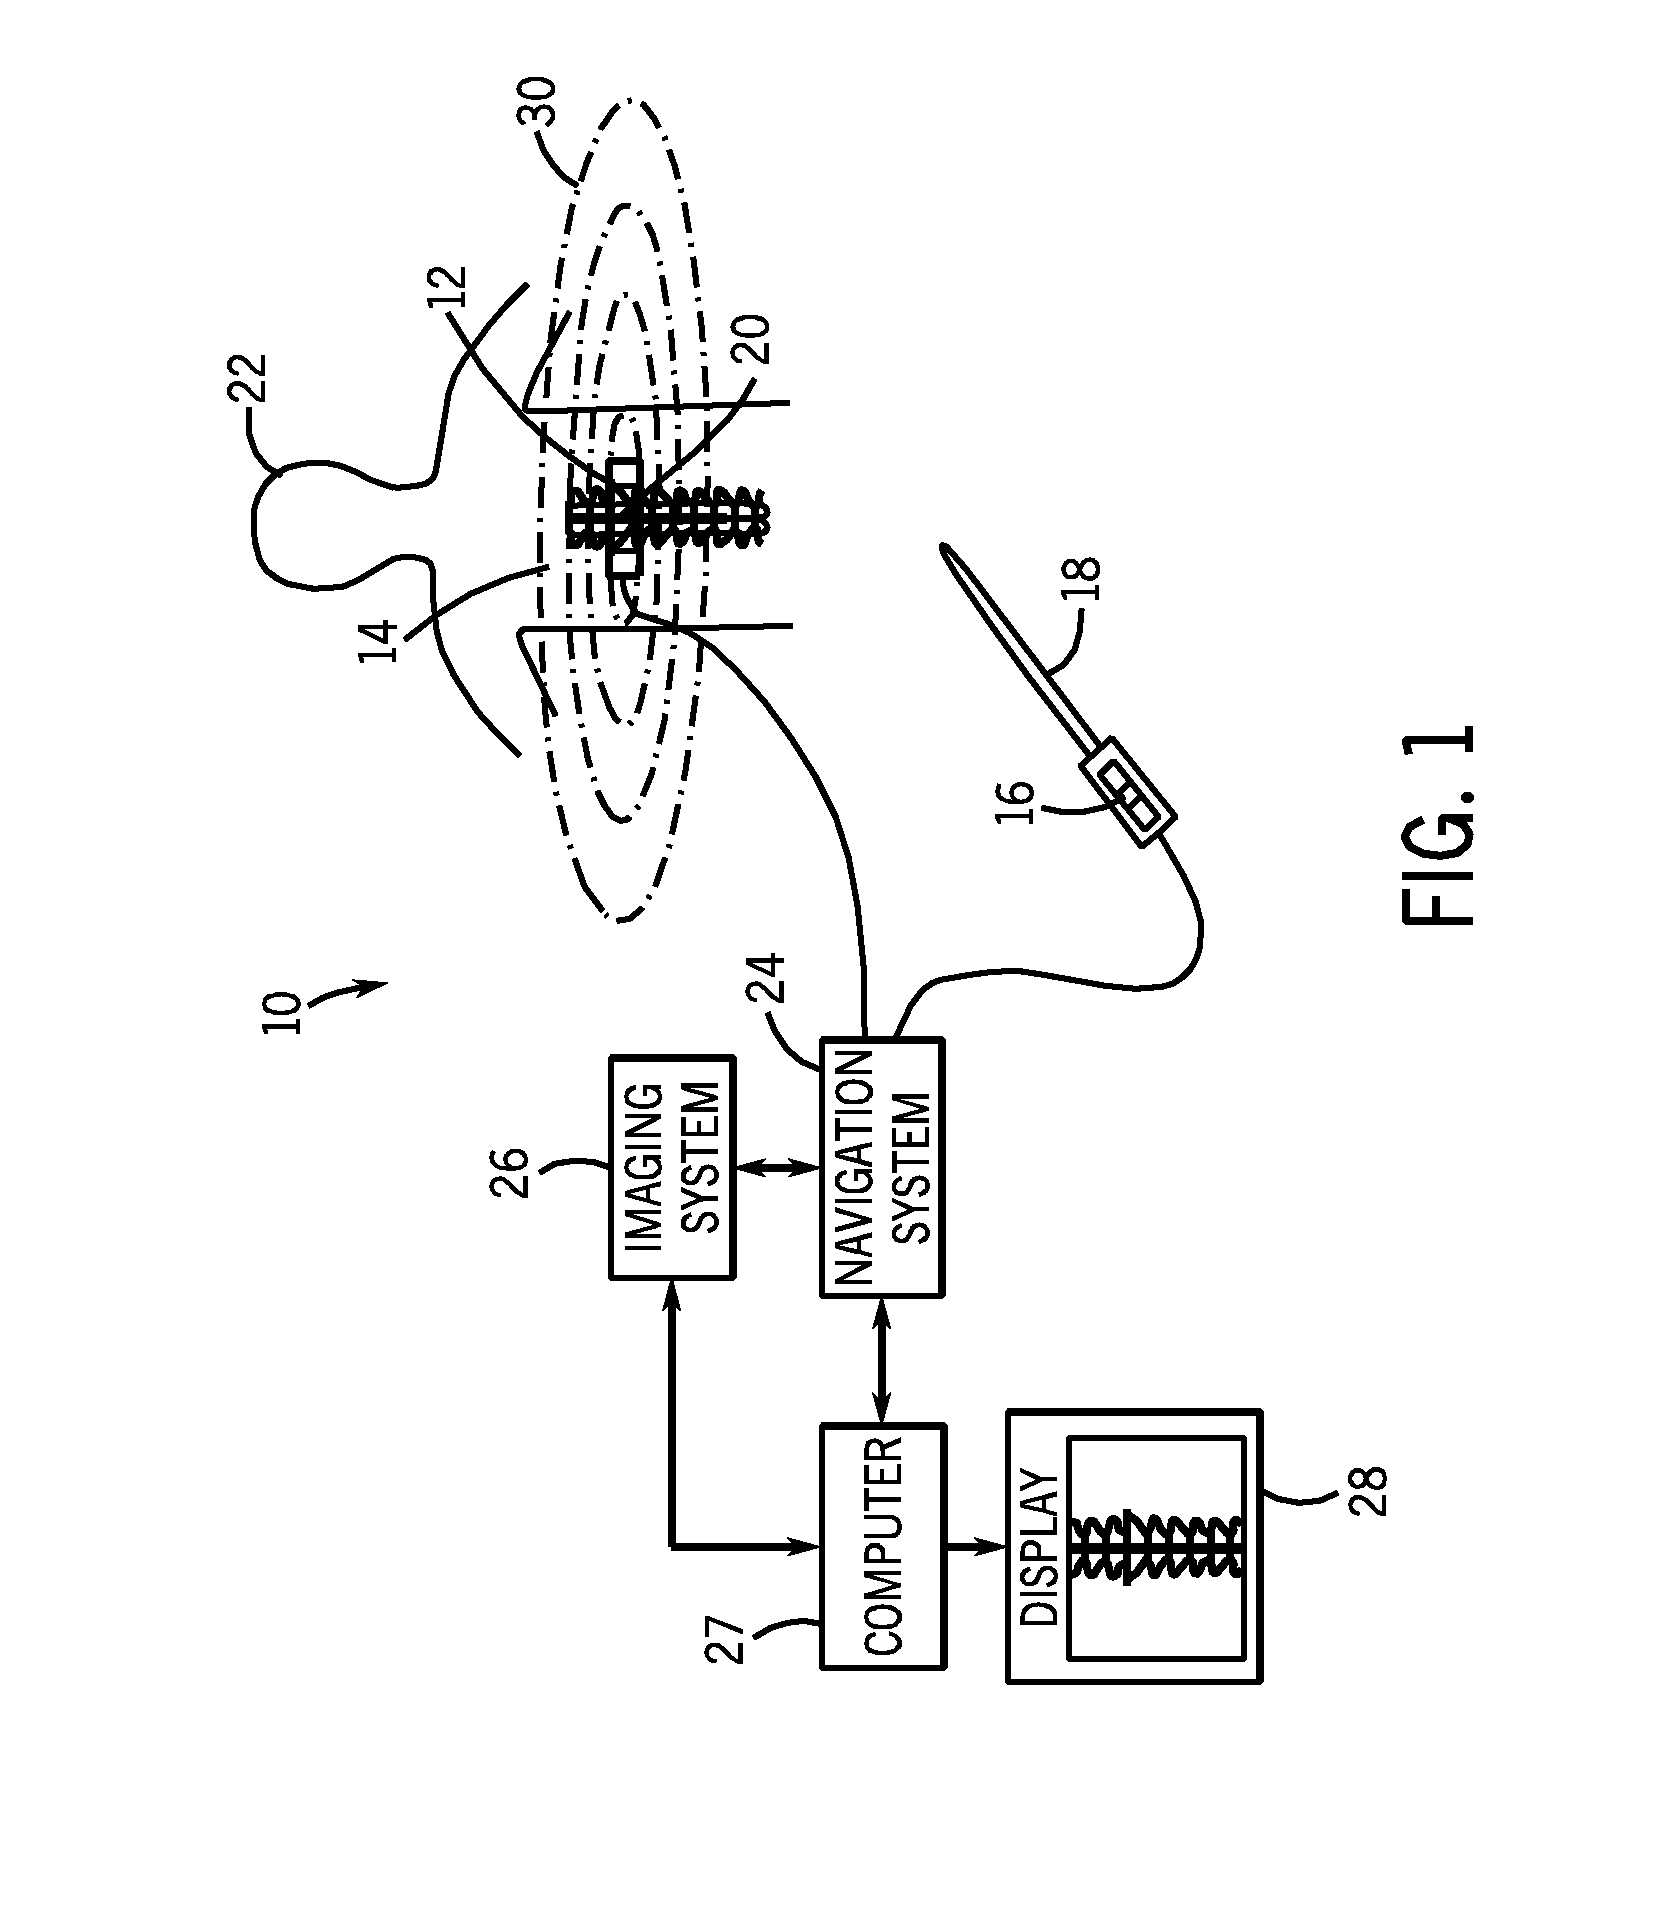 Surgical navigation planning system and method for placement of percutaneous instrumentation and implants